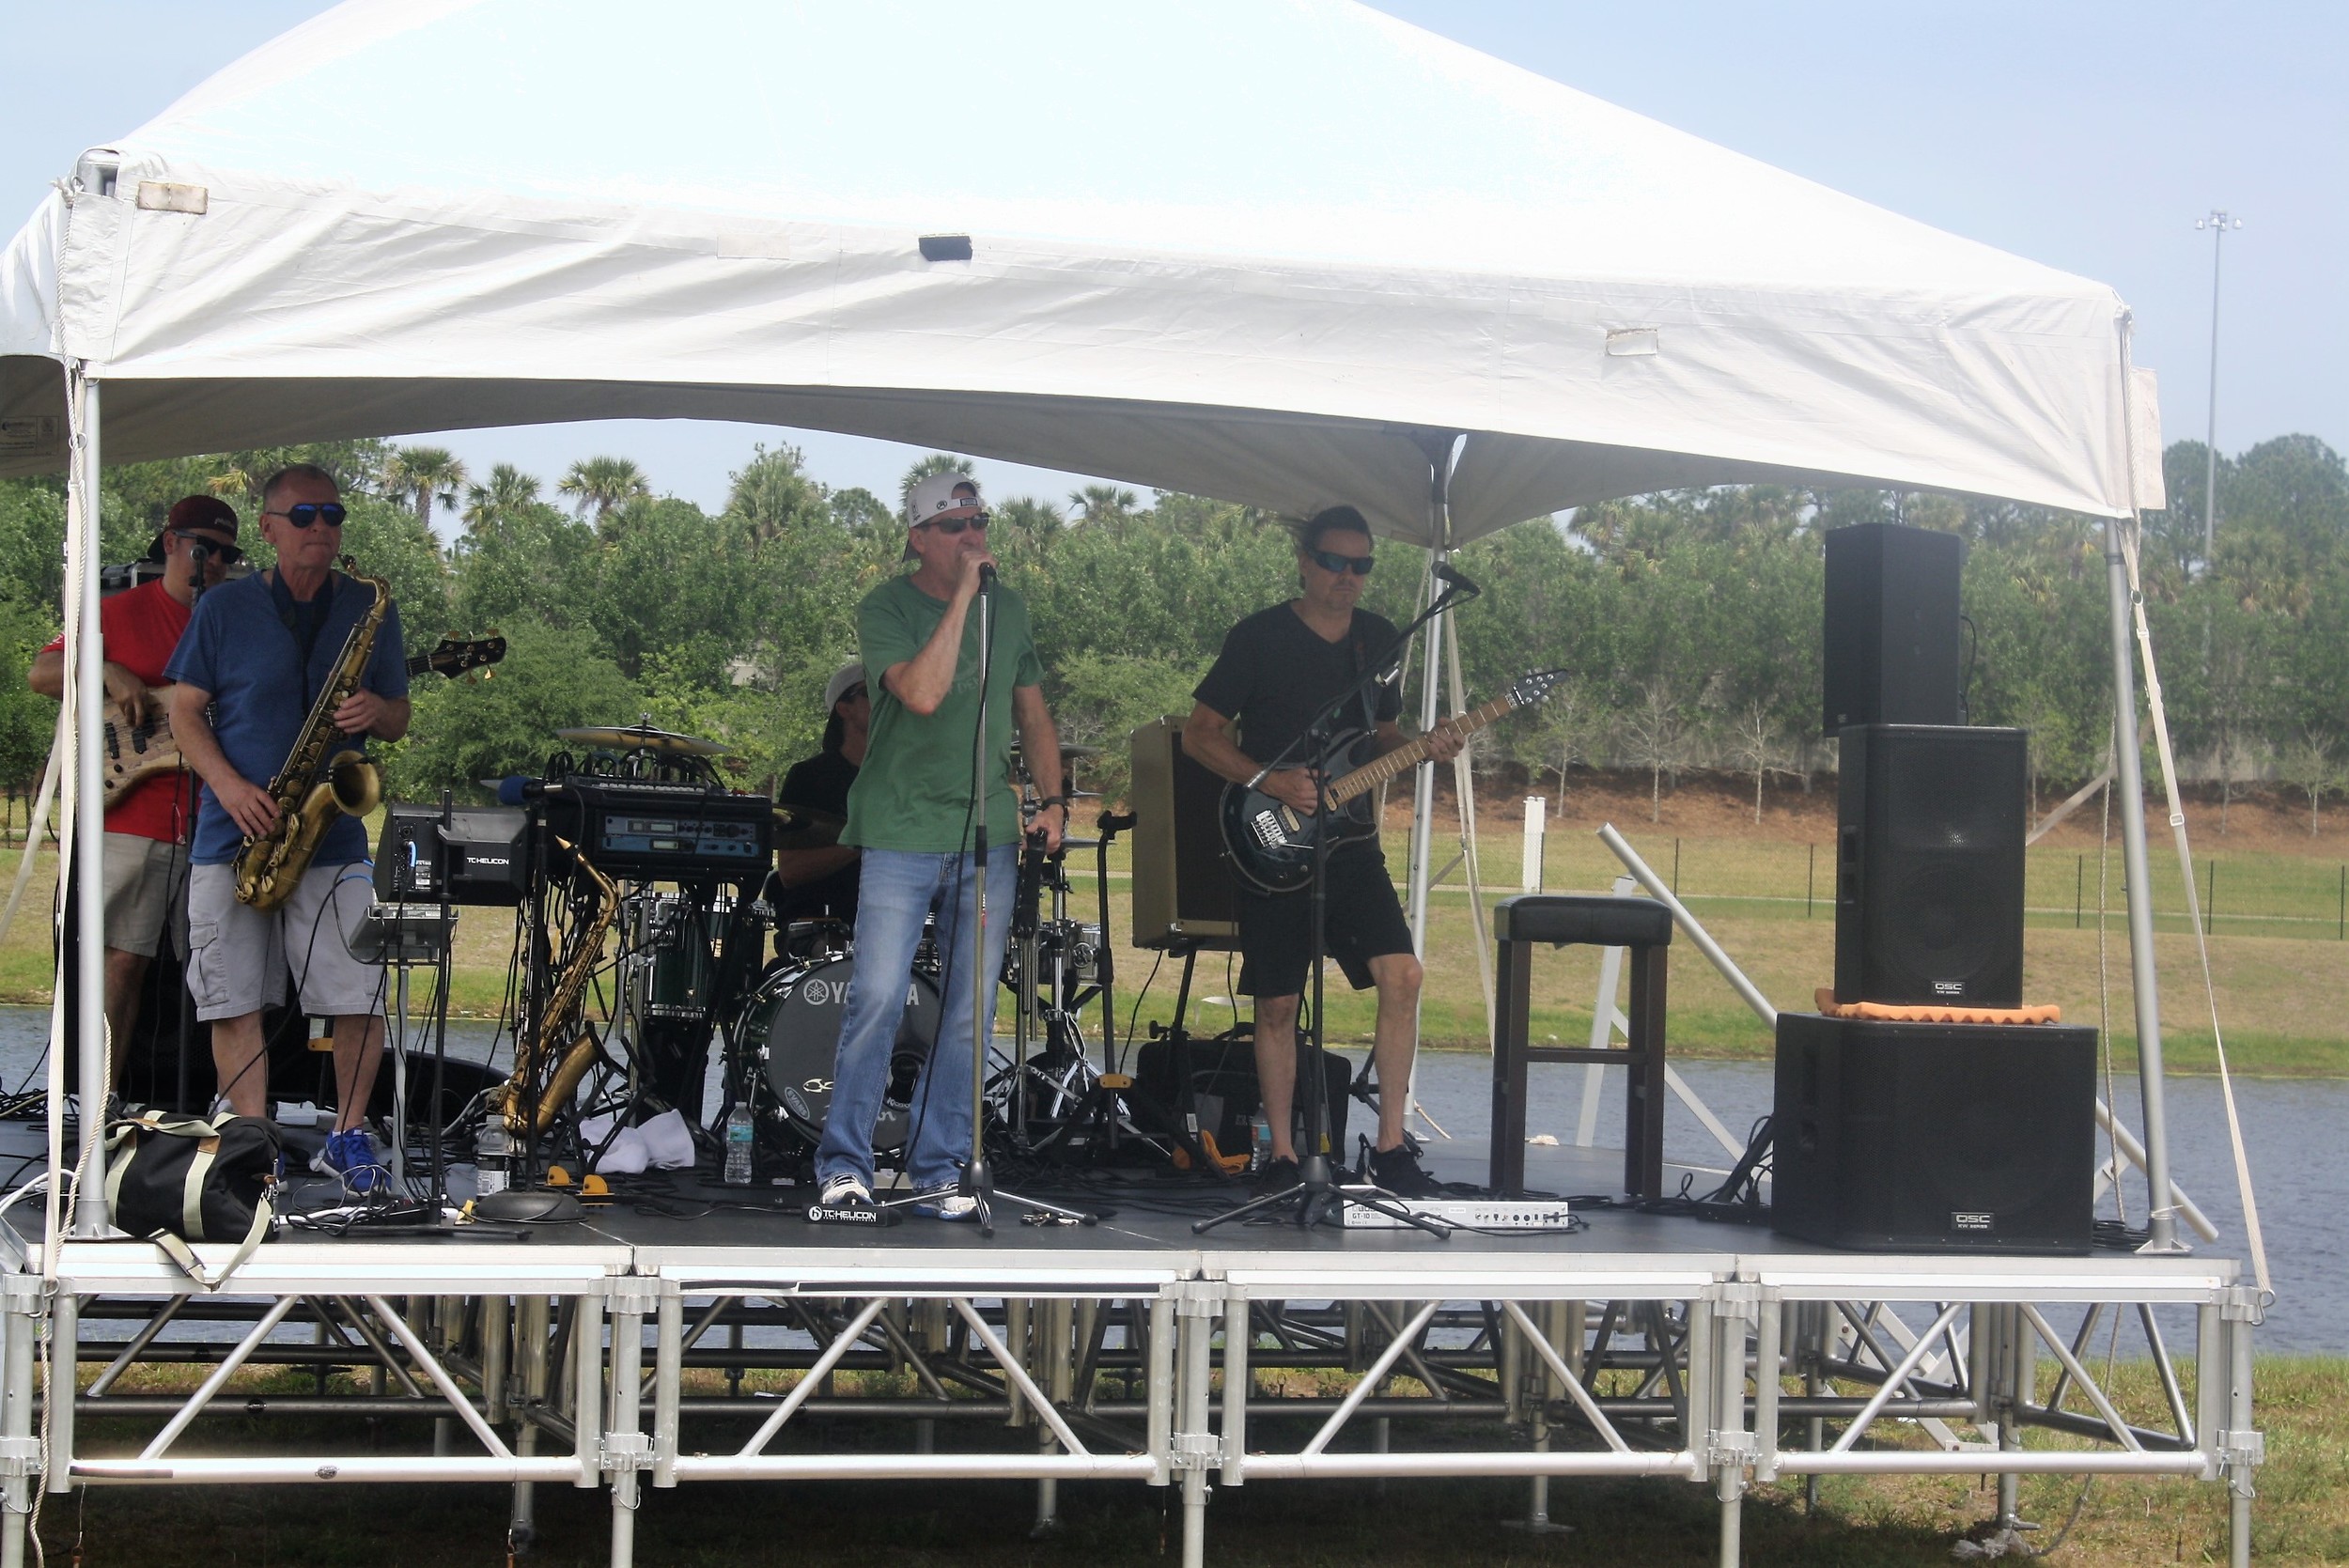 The Paul Lundgren Band entertains guests at the Nocatee Farmers Market.